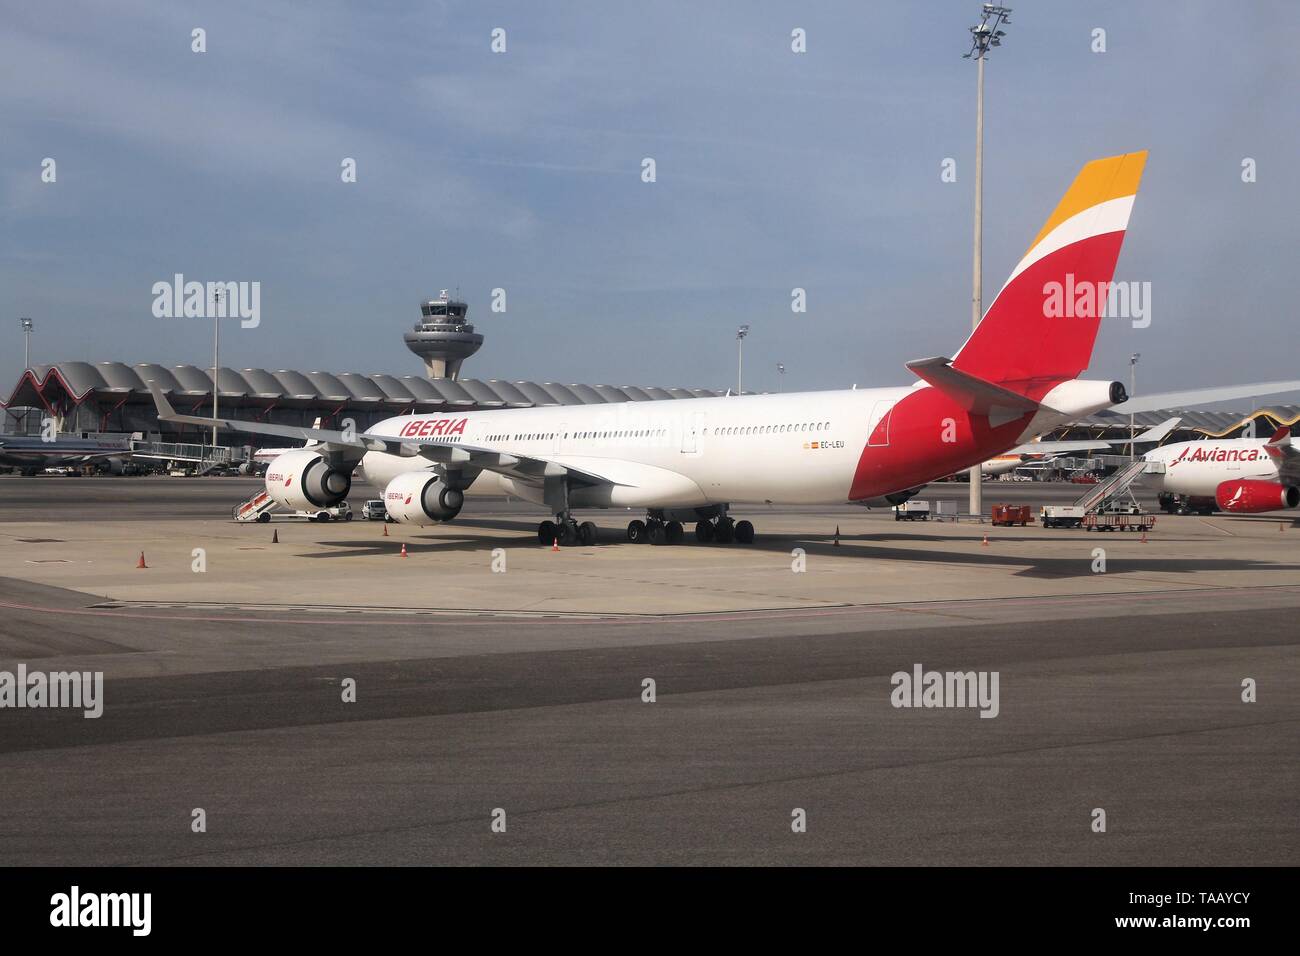 MADRID, SPAIN - OCTOBER 20, 2014: Iberia Airline Airbus A340 at Madrid Barajas Airport. Iberia is part of International Airlines Group (IAG, parent co Stock Photo